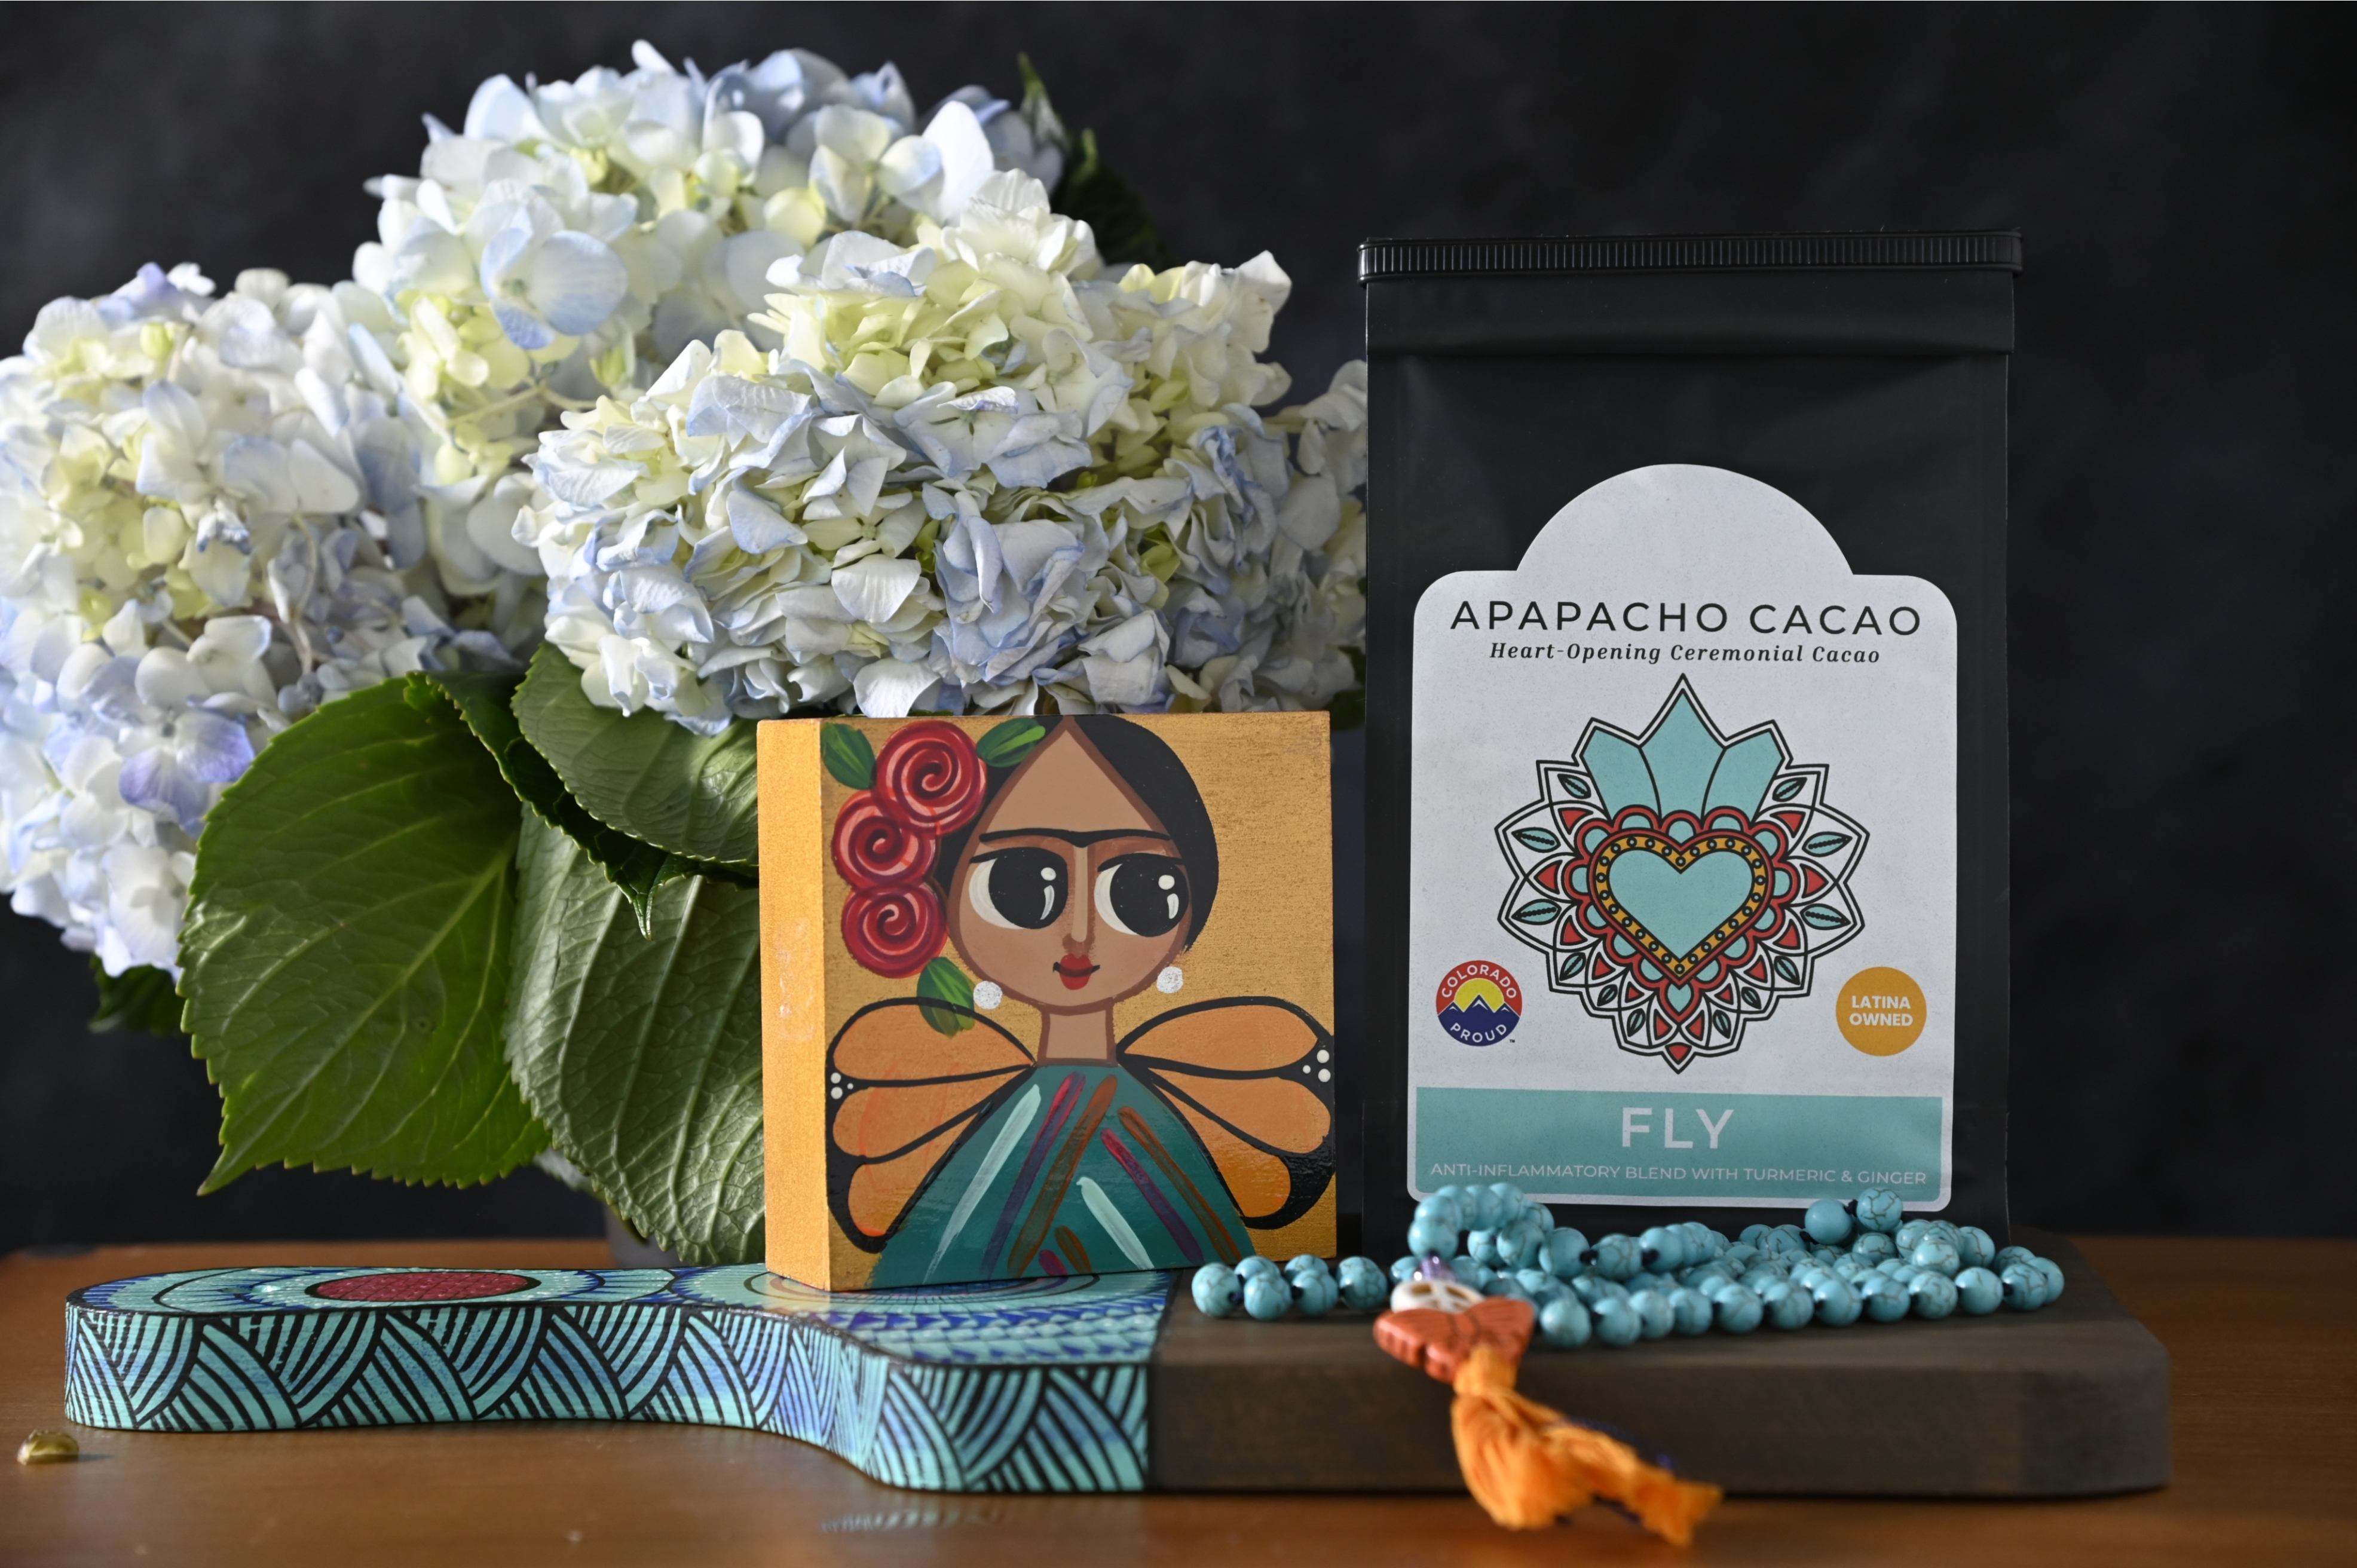 Apapacho Cacao "Fly" blend with turmeric and ginger